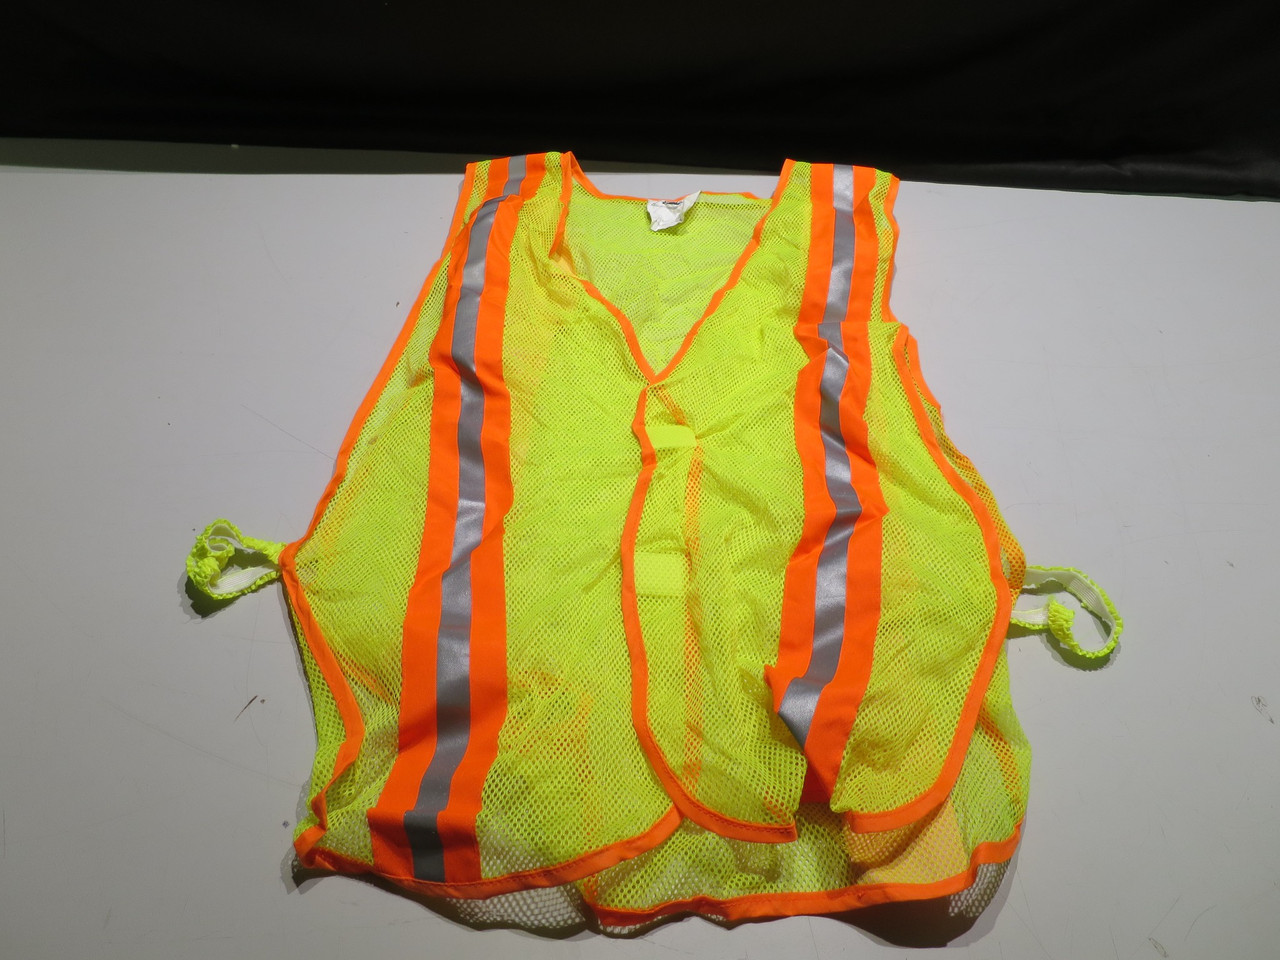 Durawear 16220 One Size Fits All Mesh Yellow / Orange Reflective Safety Vest